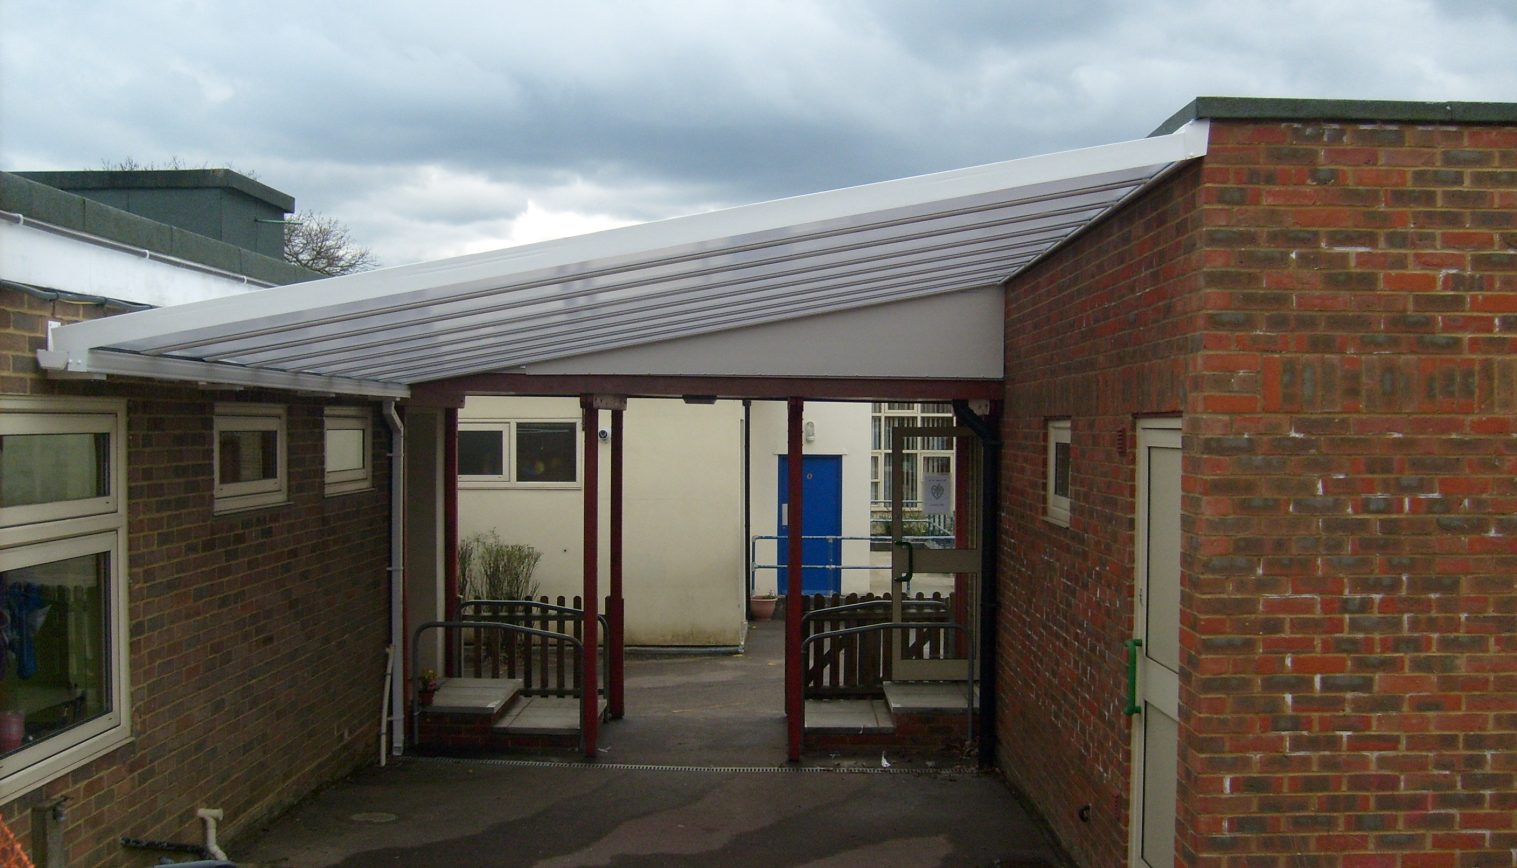 Theydon Bois Primary School – Wall Mounted Canopy – Second Installation